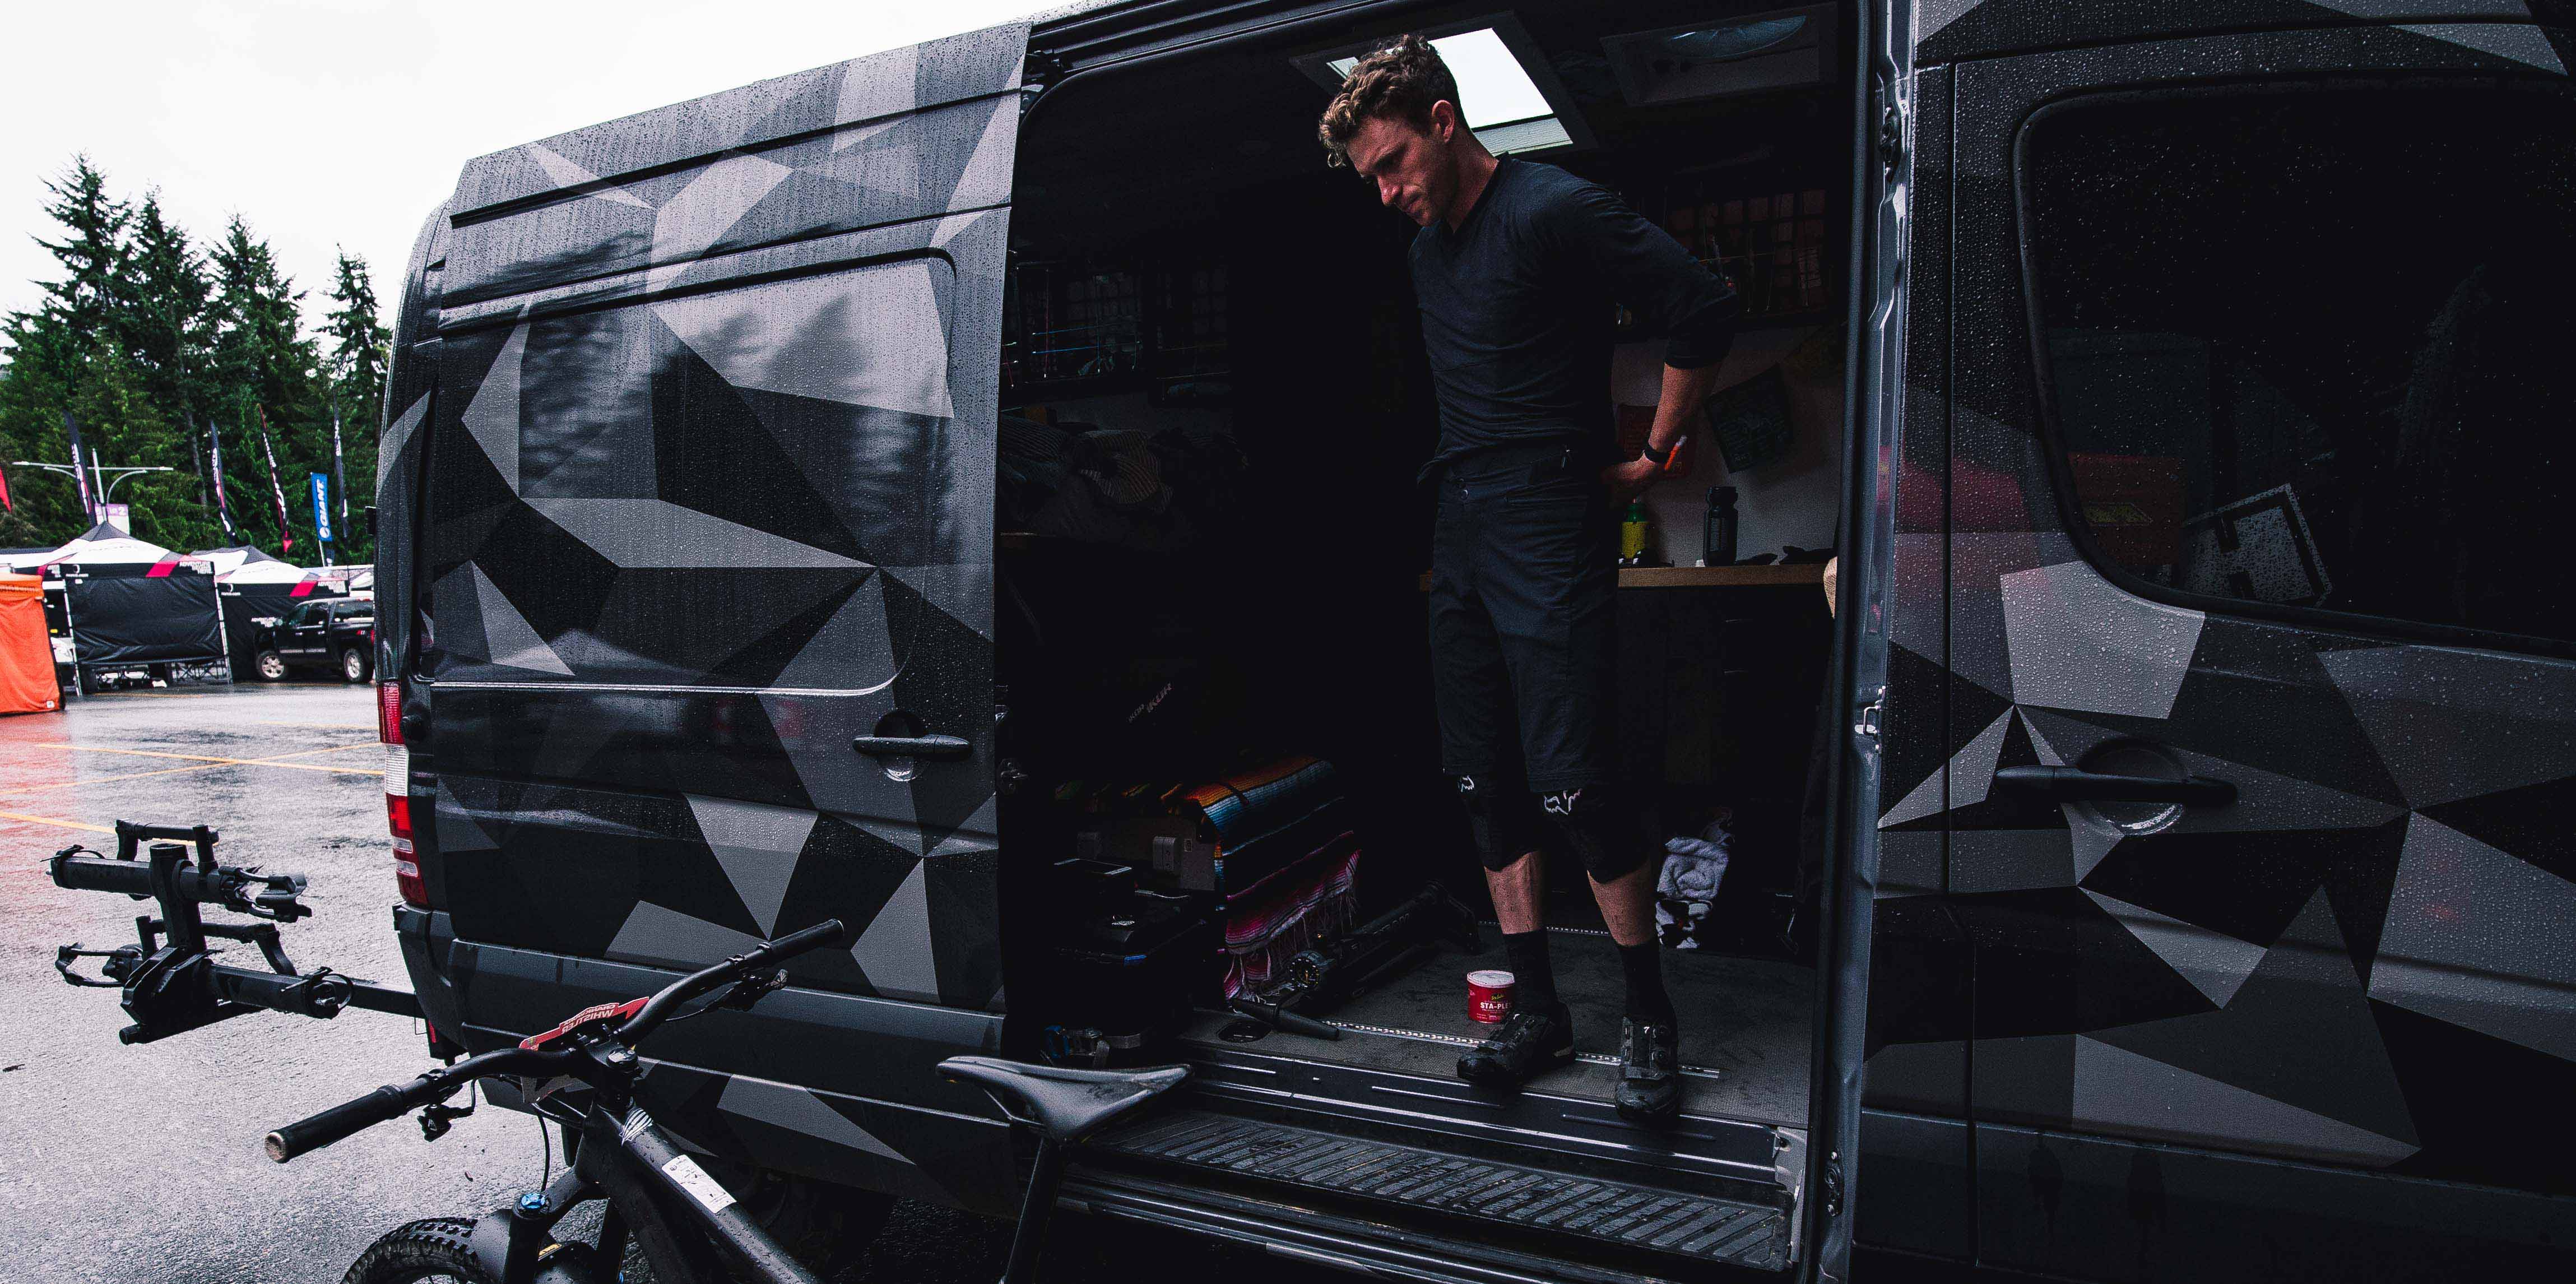 Garmin Ambassador Jimmy Smith standing in his van before his mountain biking competition